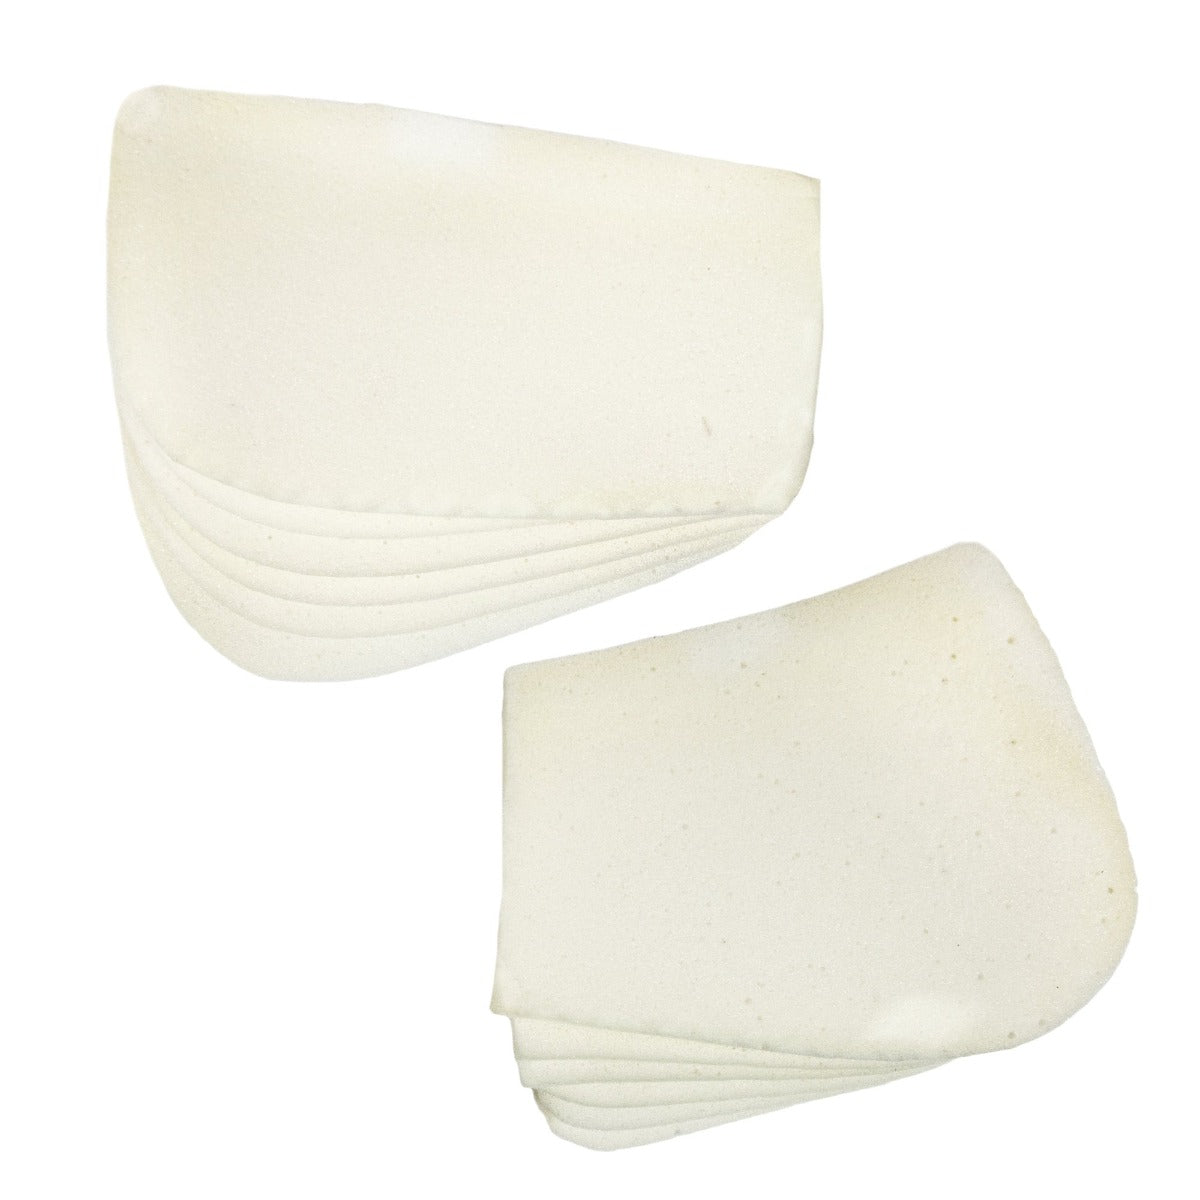 Image of memory foam inserts for ECP saddle pads.